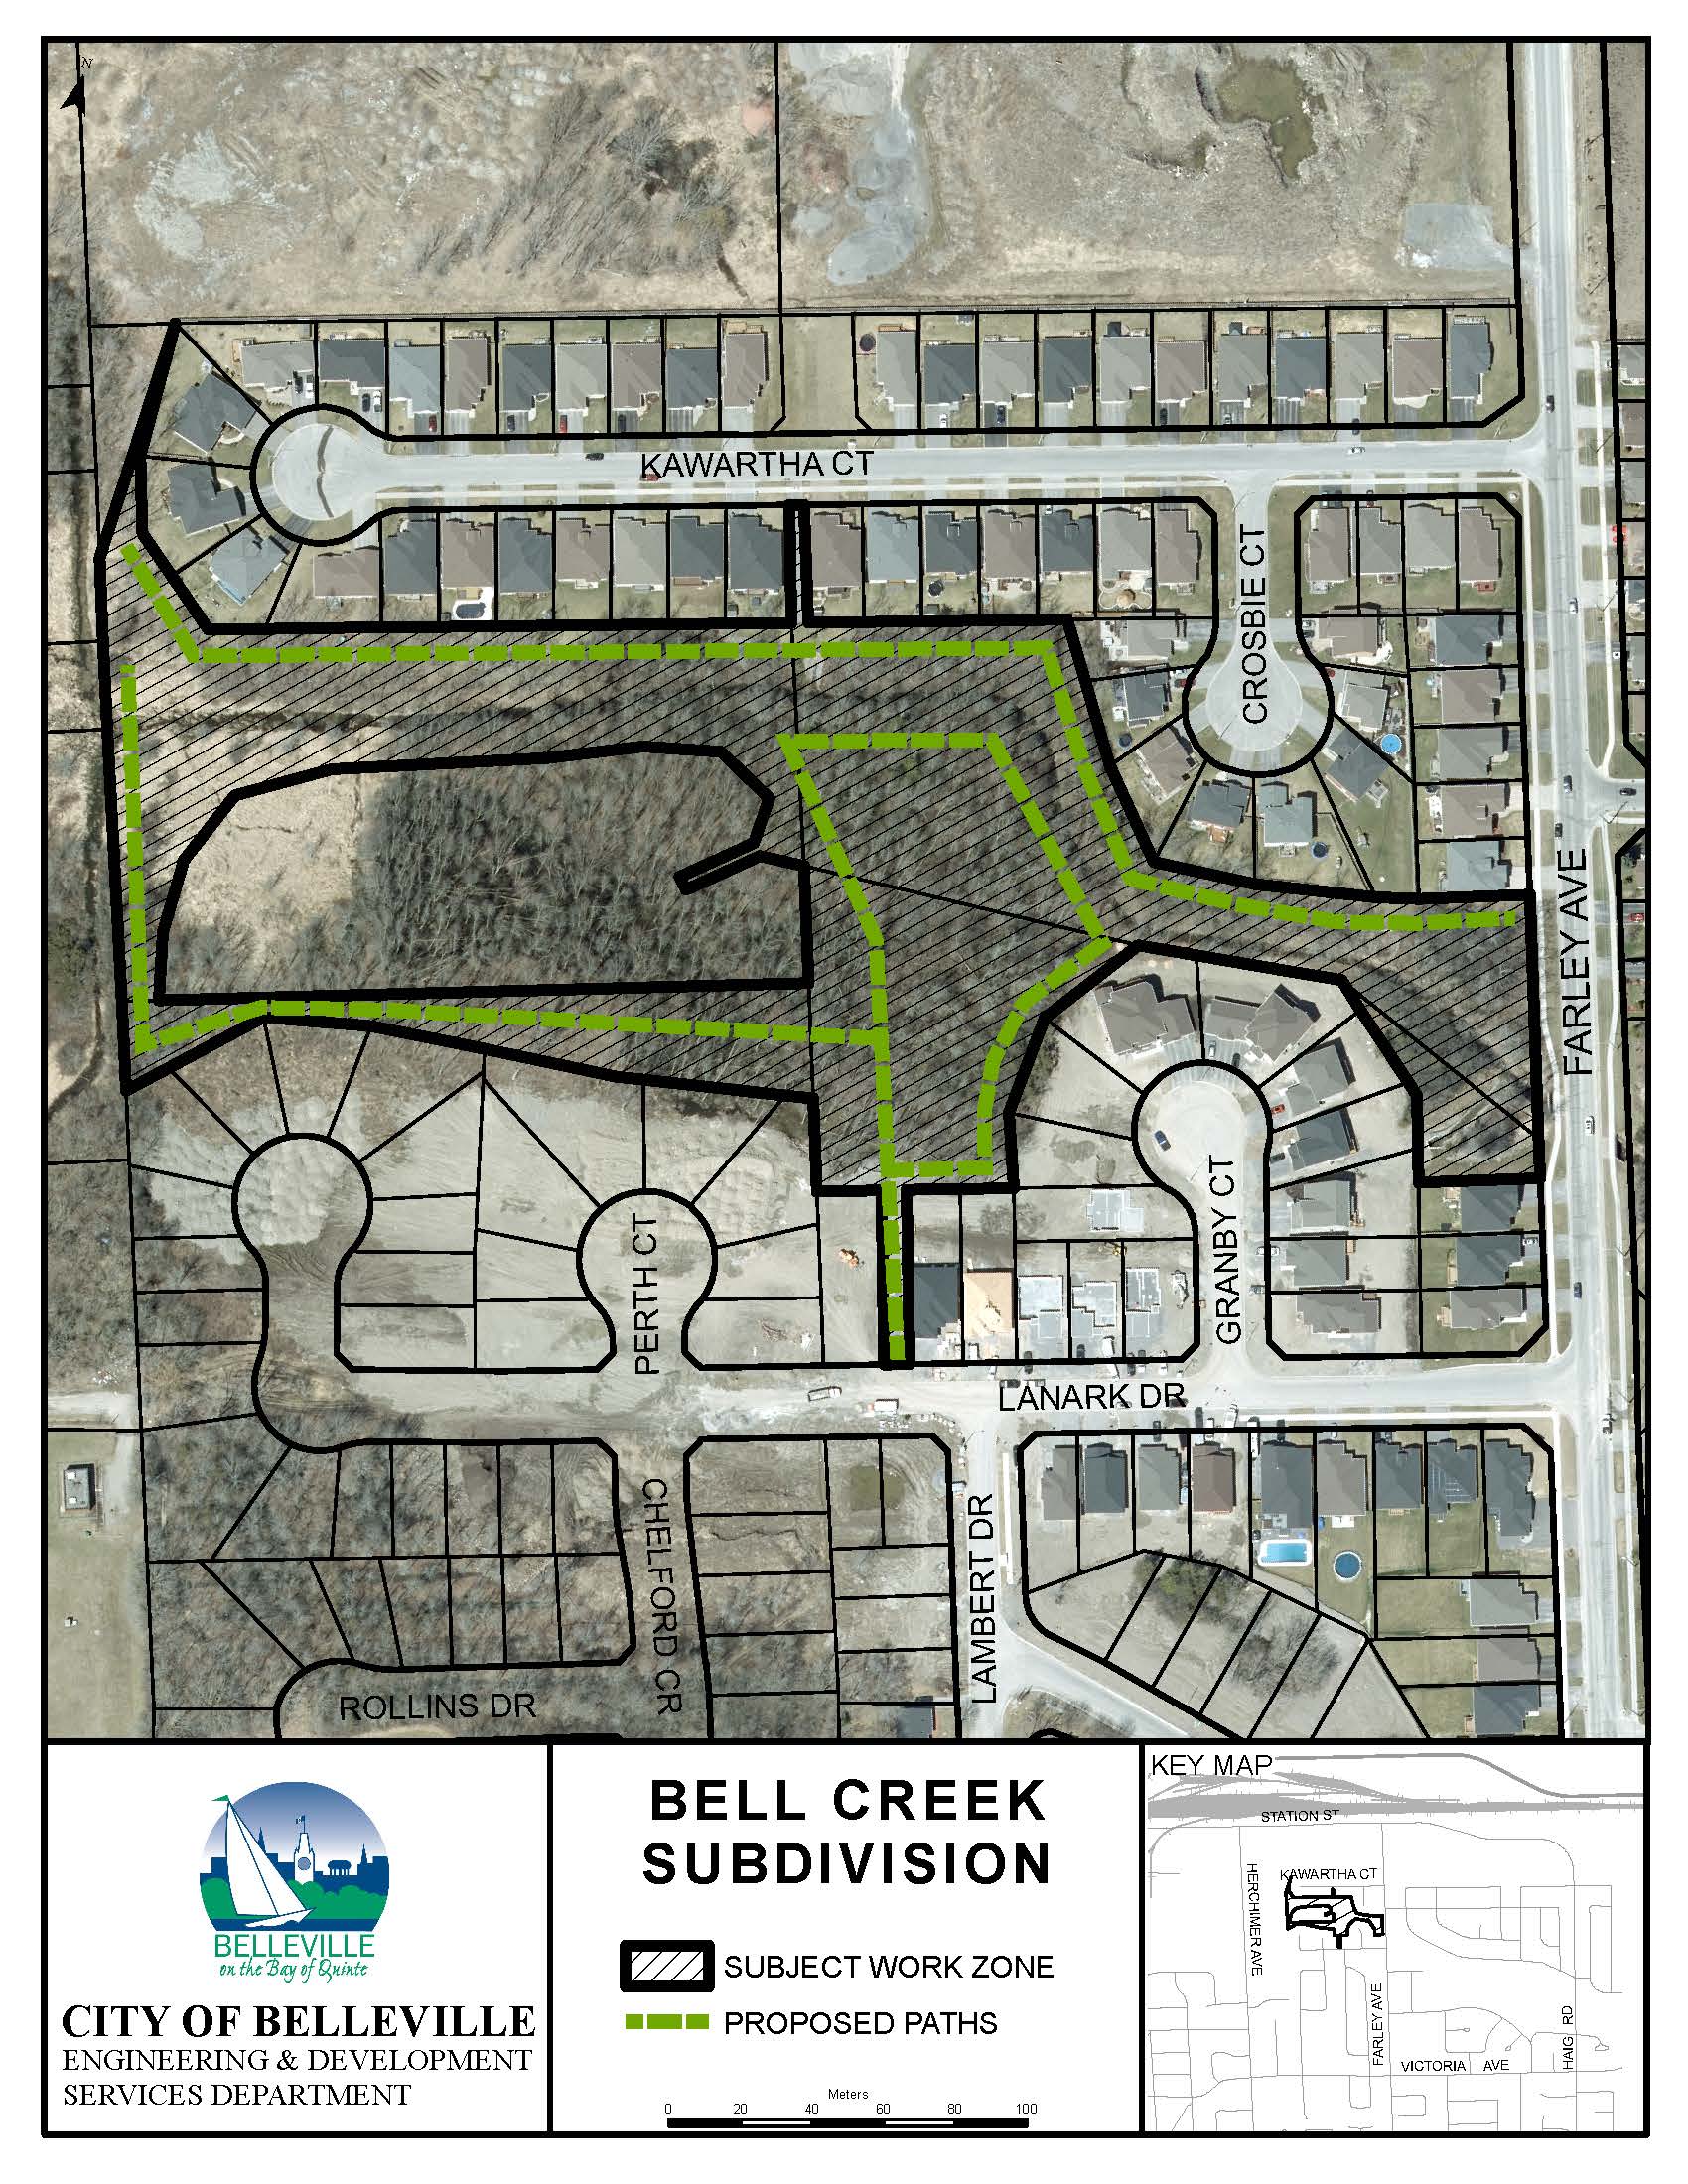 Map indicating subject work zones and access paths in the Bell Creek subdivision.